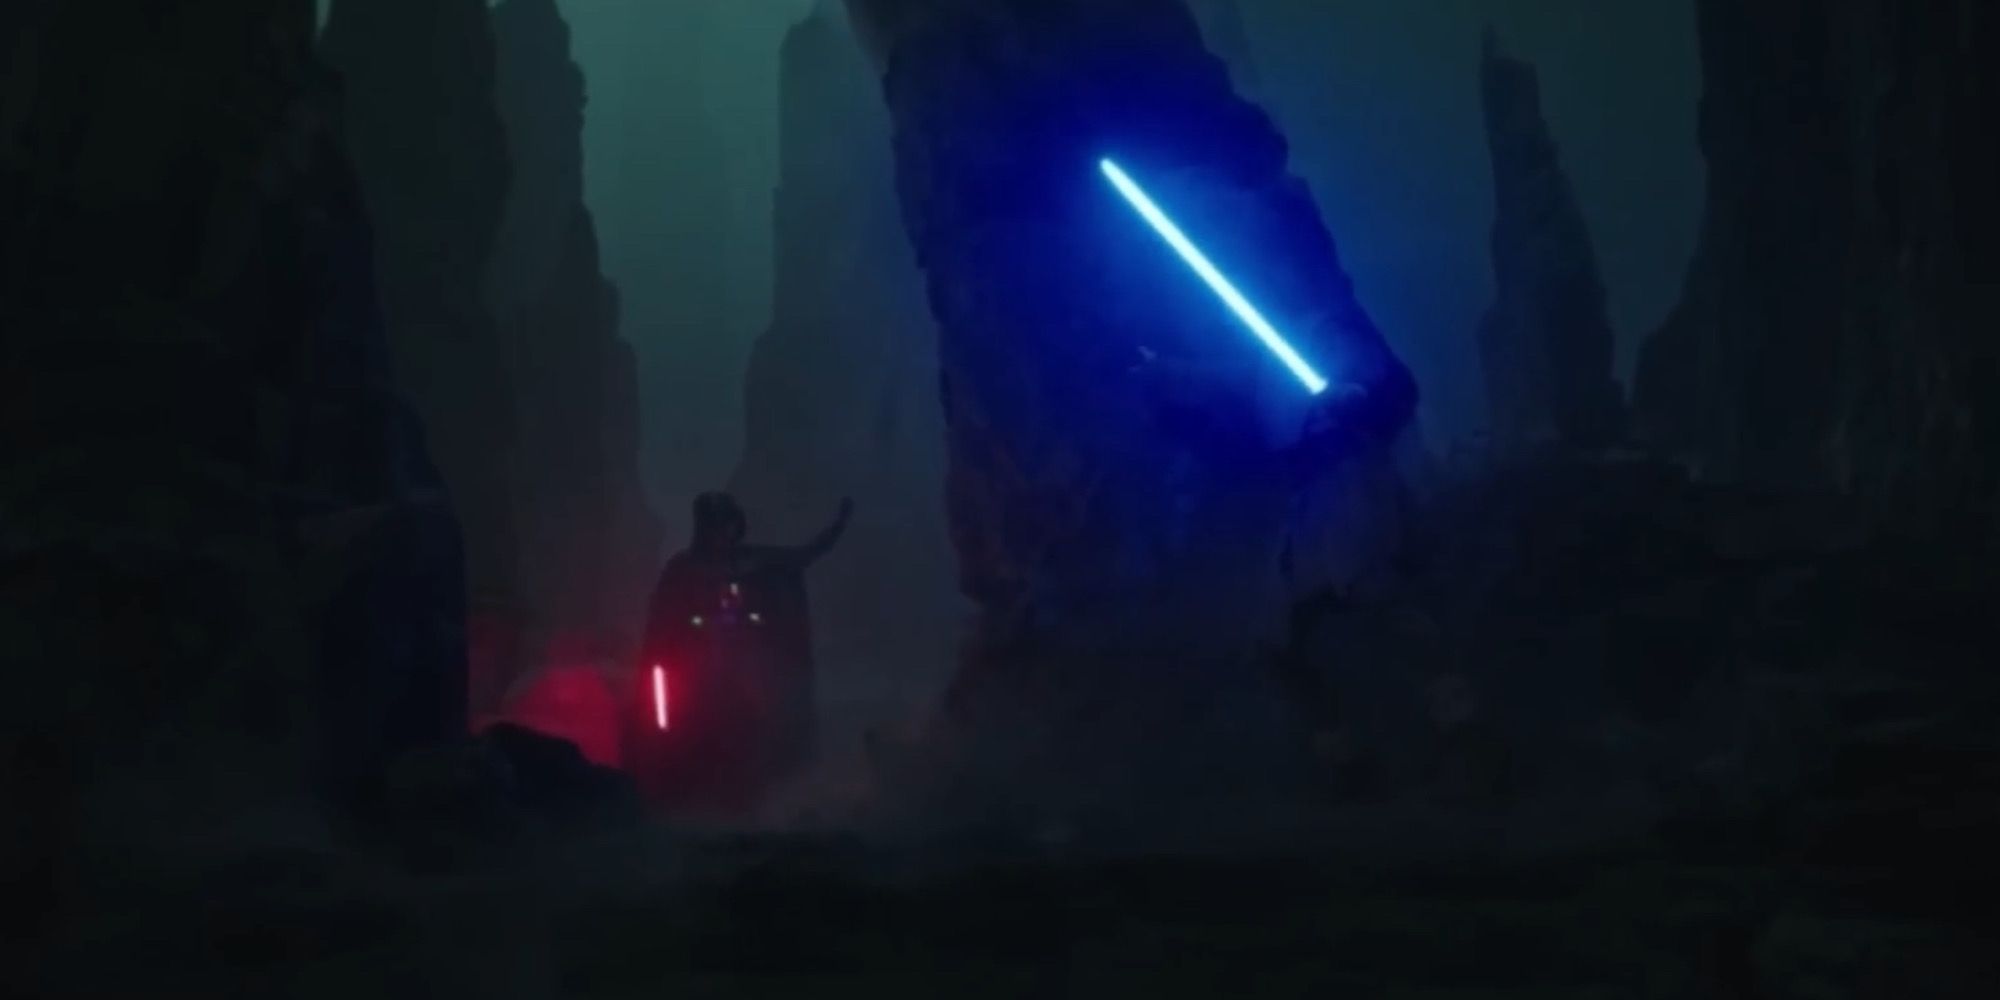 Obi-Wan And Darth Vader Using The Force against one another in the Obi-Wan Kenobi show with their lightsabers ignited